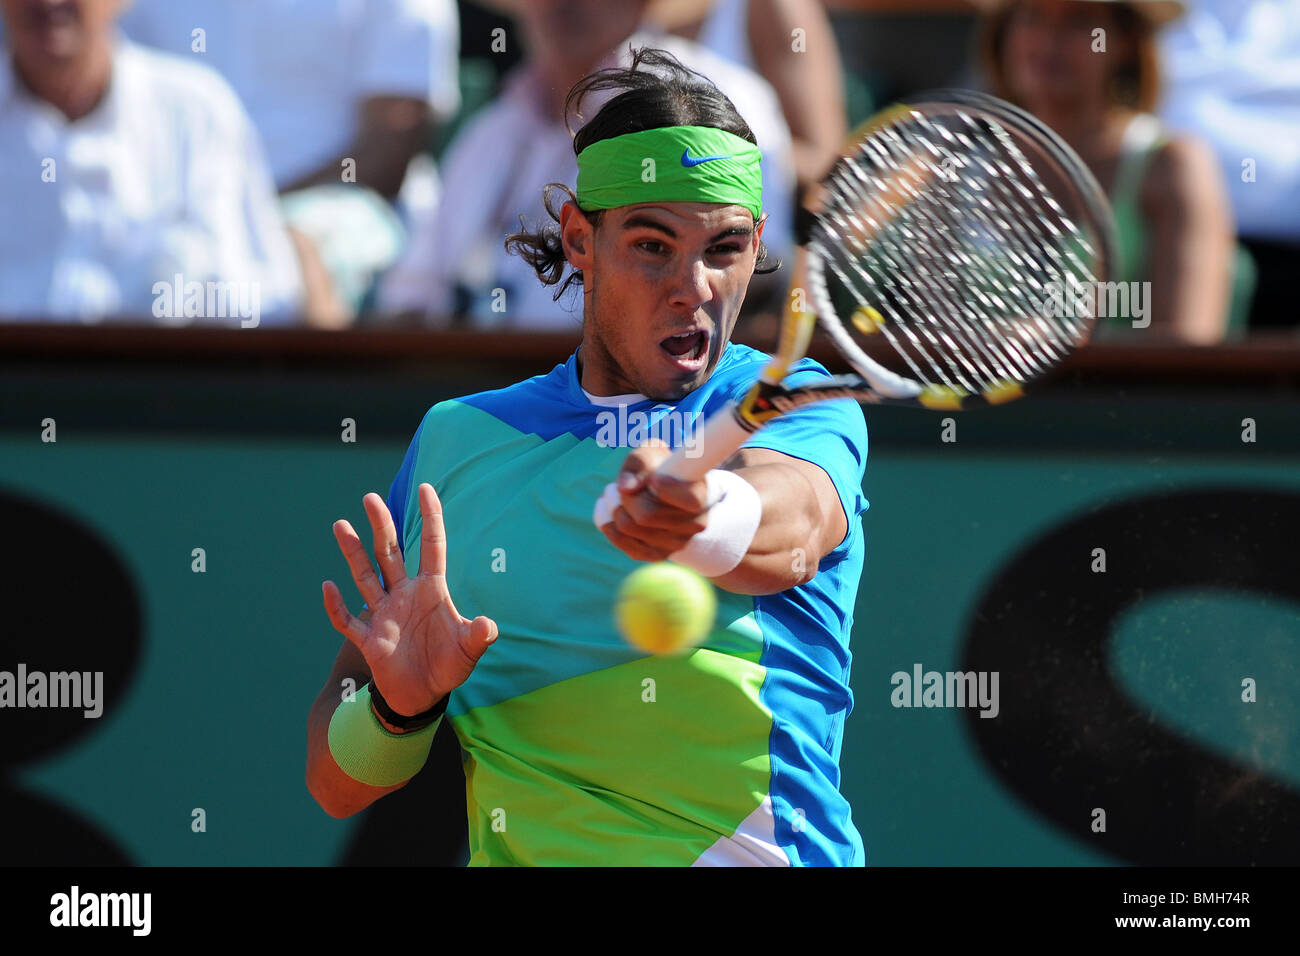 Rafael Nadal (ESP) competing at the 2010 French Open Stock Photo